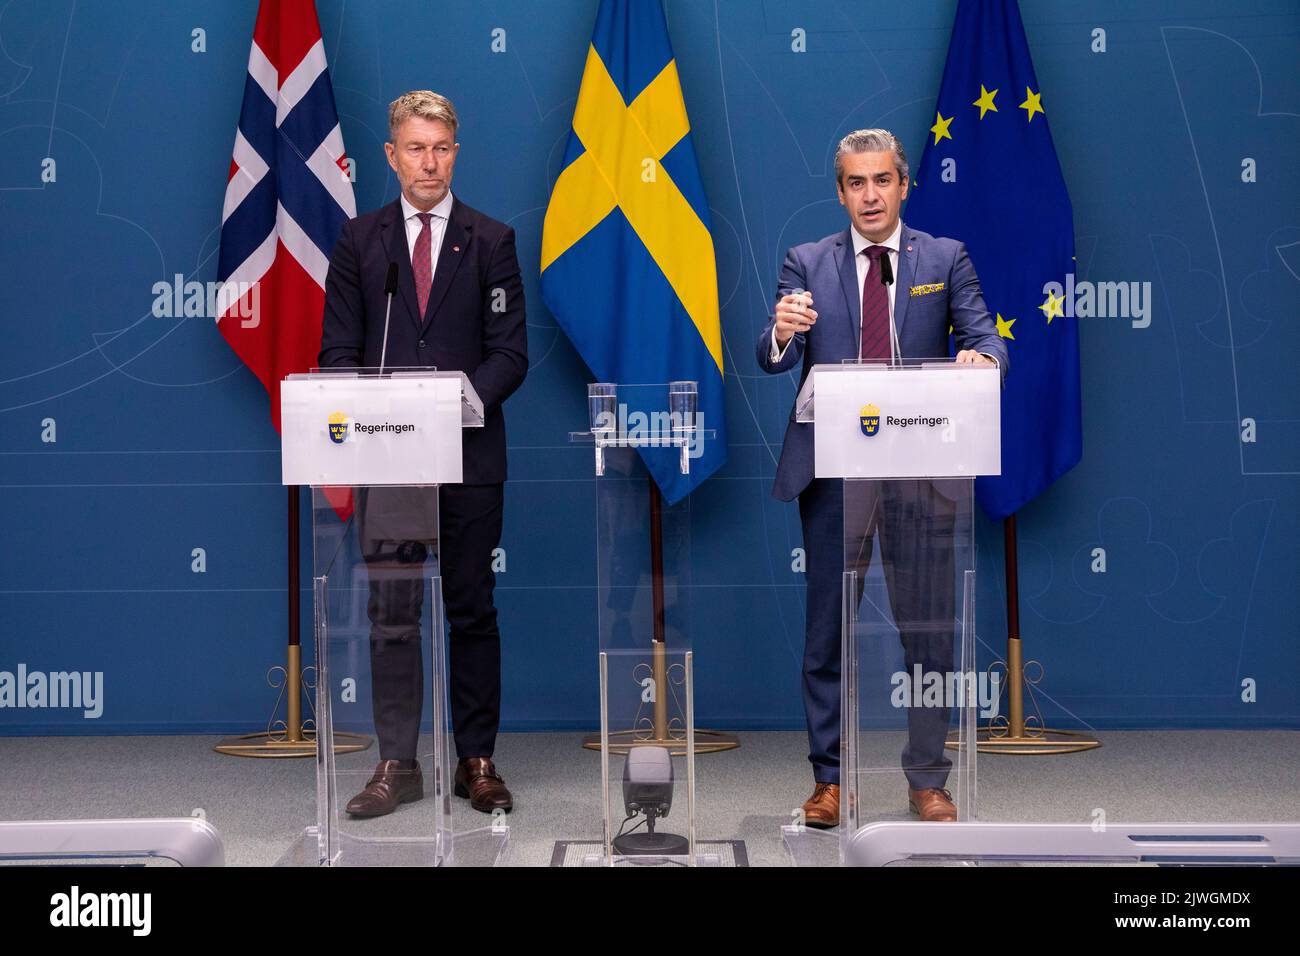 STOCKHOLM, Sept. 5, 2022 (Xinhua) -- Swedish Minister for Energy and Digital Development Khashayar Farmanbar (R) and Norwegian Minister of Petroleum and Energy Terje Aasland attend a press conference in Stockholm, Sweden, on Sept. 5, 2022. Sweden and Norway announced on Monday they were ready to launch a joint task force aimed at reining in the soaring electricity costs in the Nordic region. (Ninni Andersson/Government Offices of Sweden/Handout via Xinhua) Stock Photo